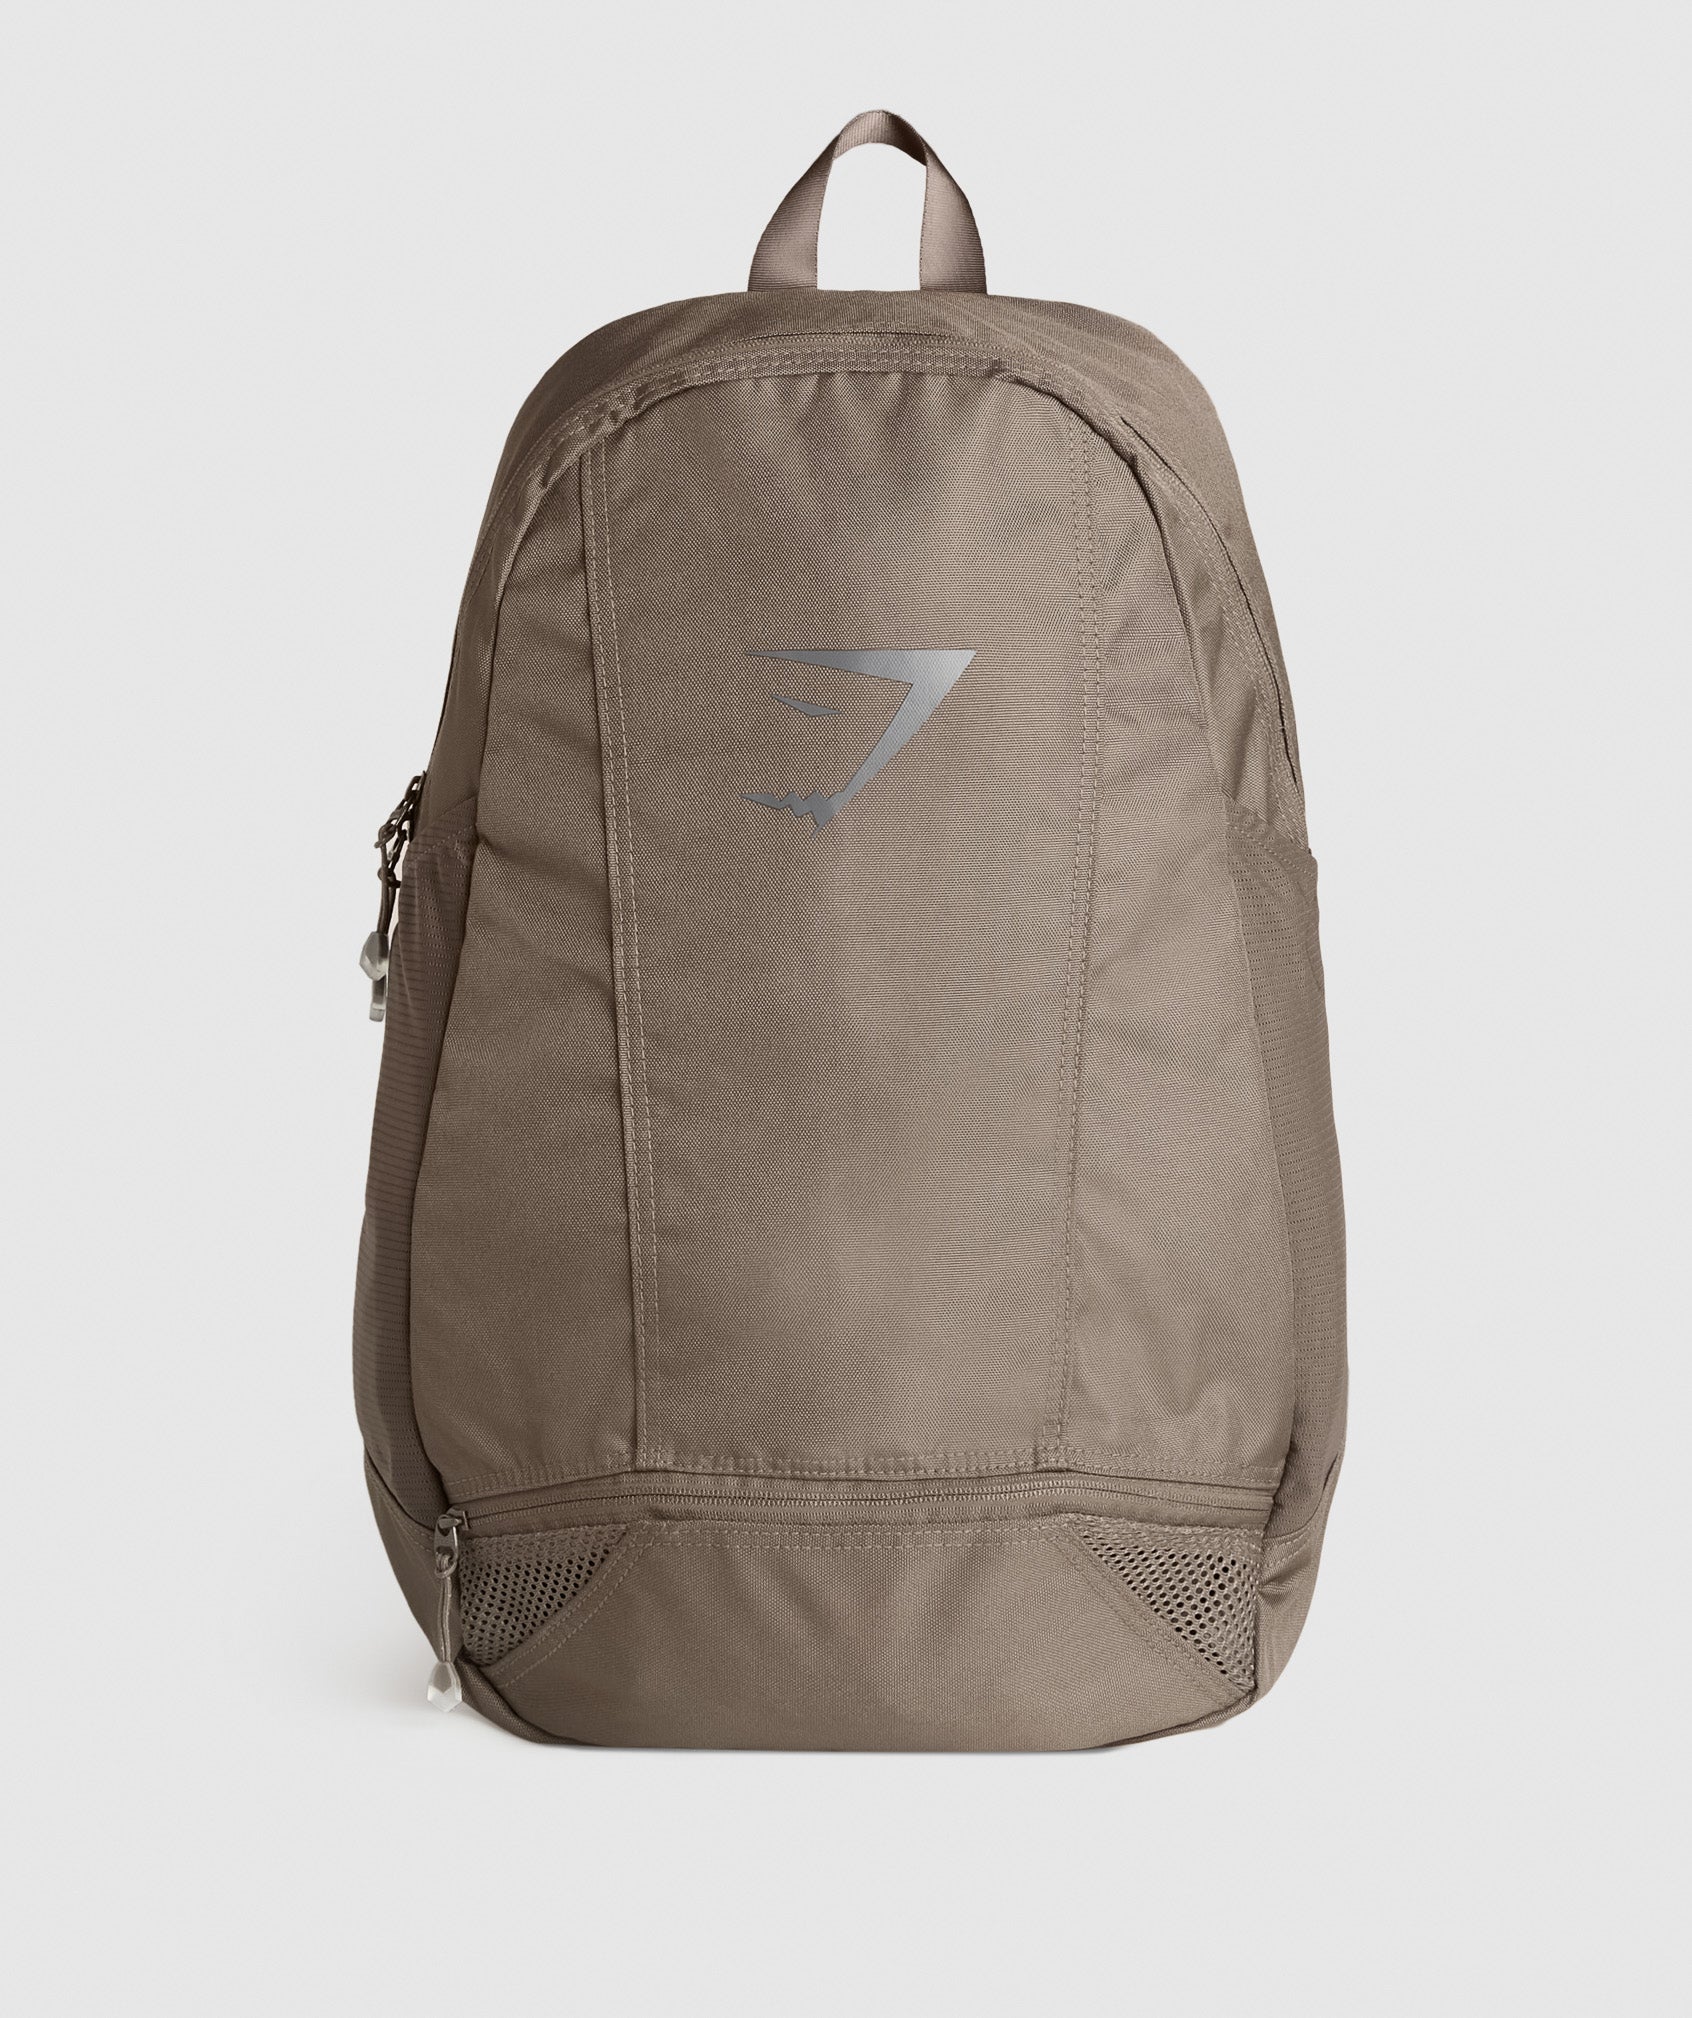 Sharkhead Backpack in Camo Brown - view 1